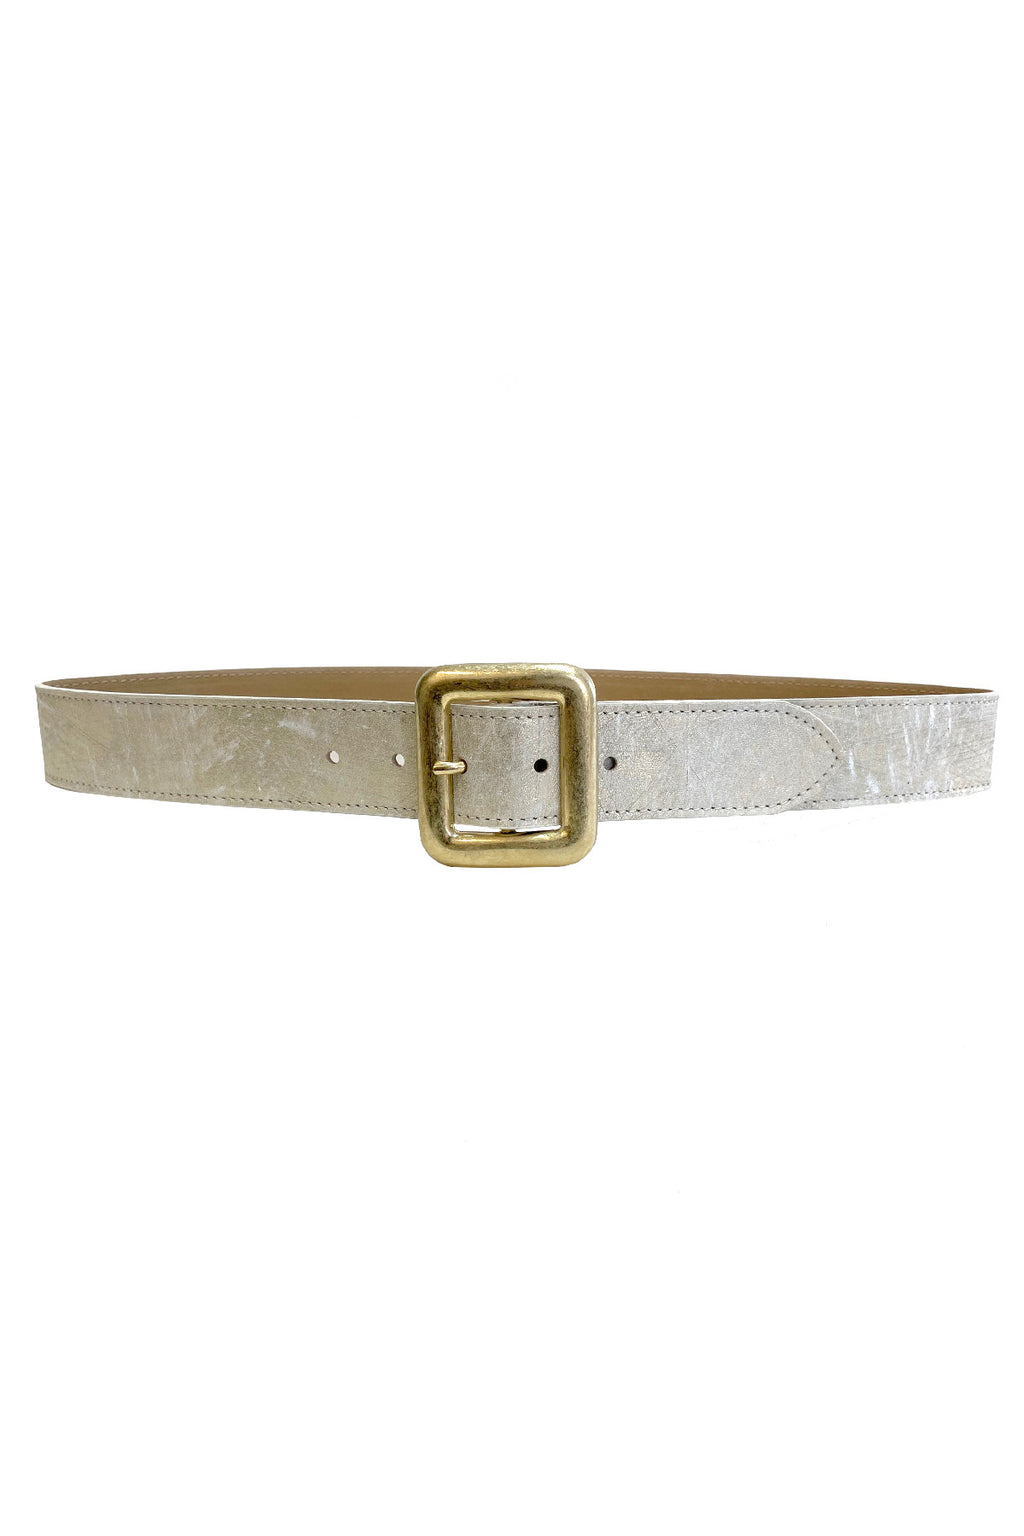 Ivory Metallic Belt with Gold Buckle